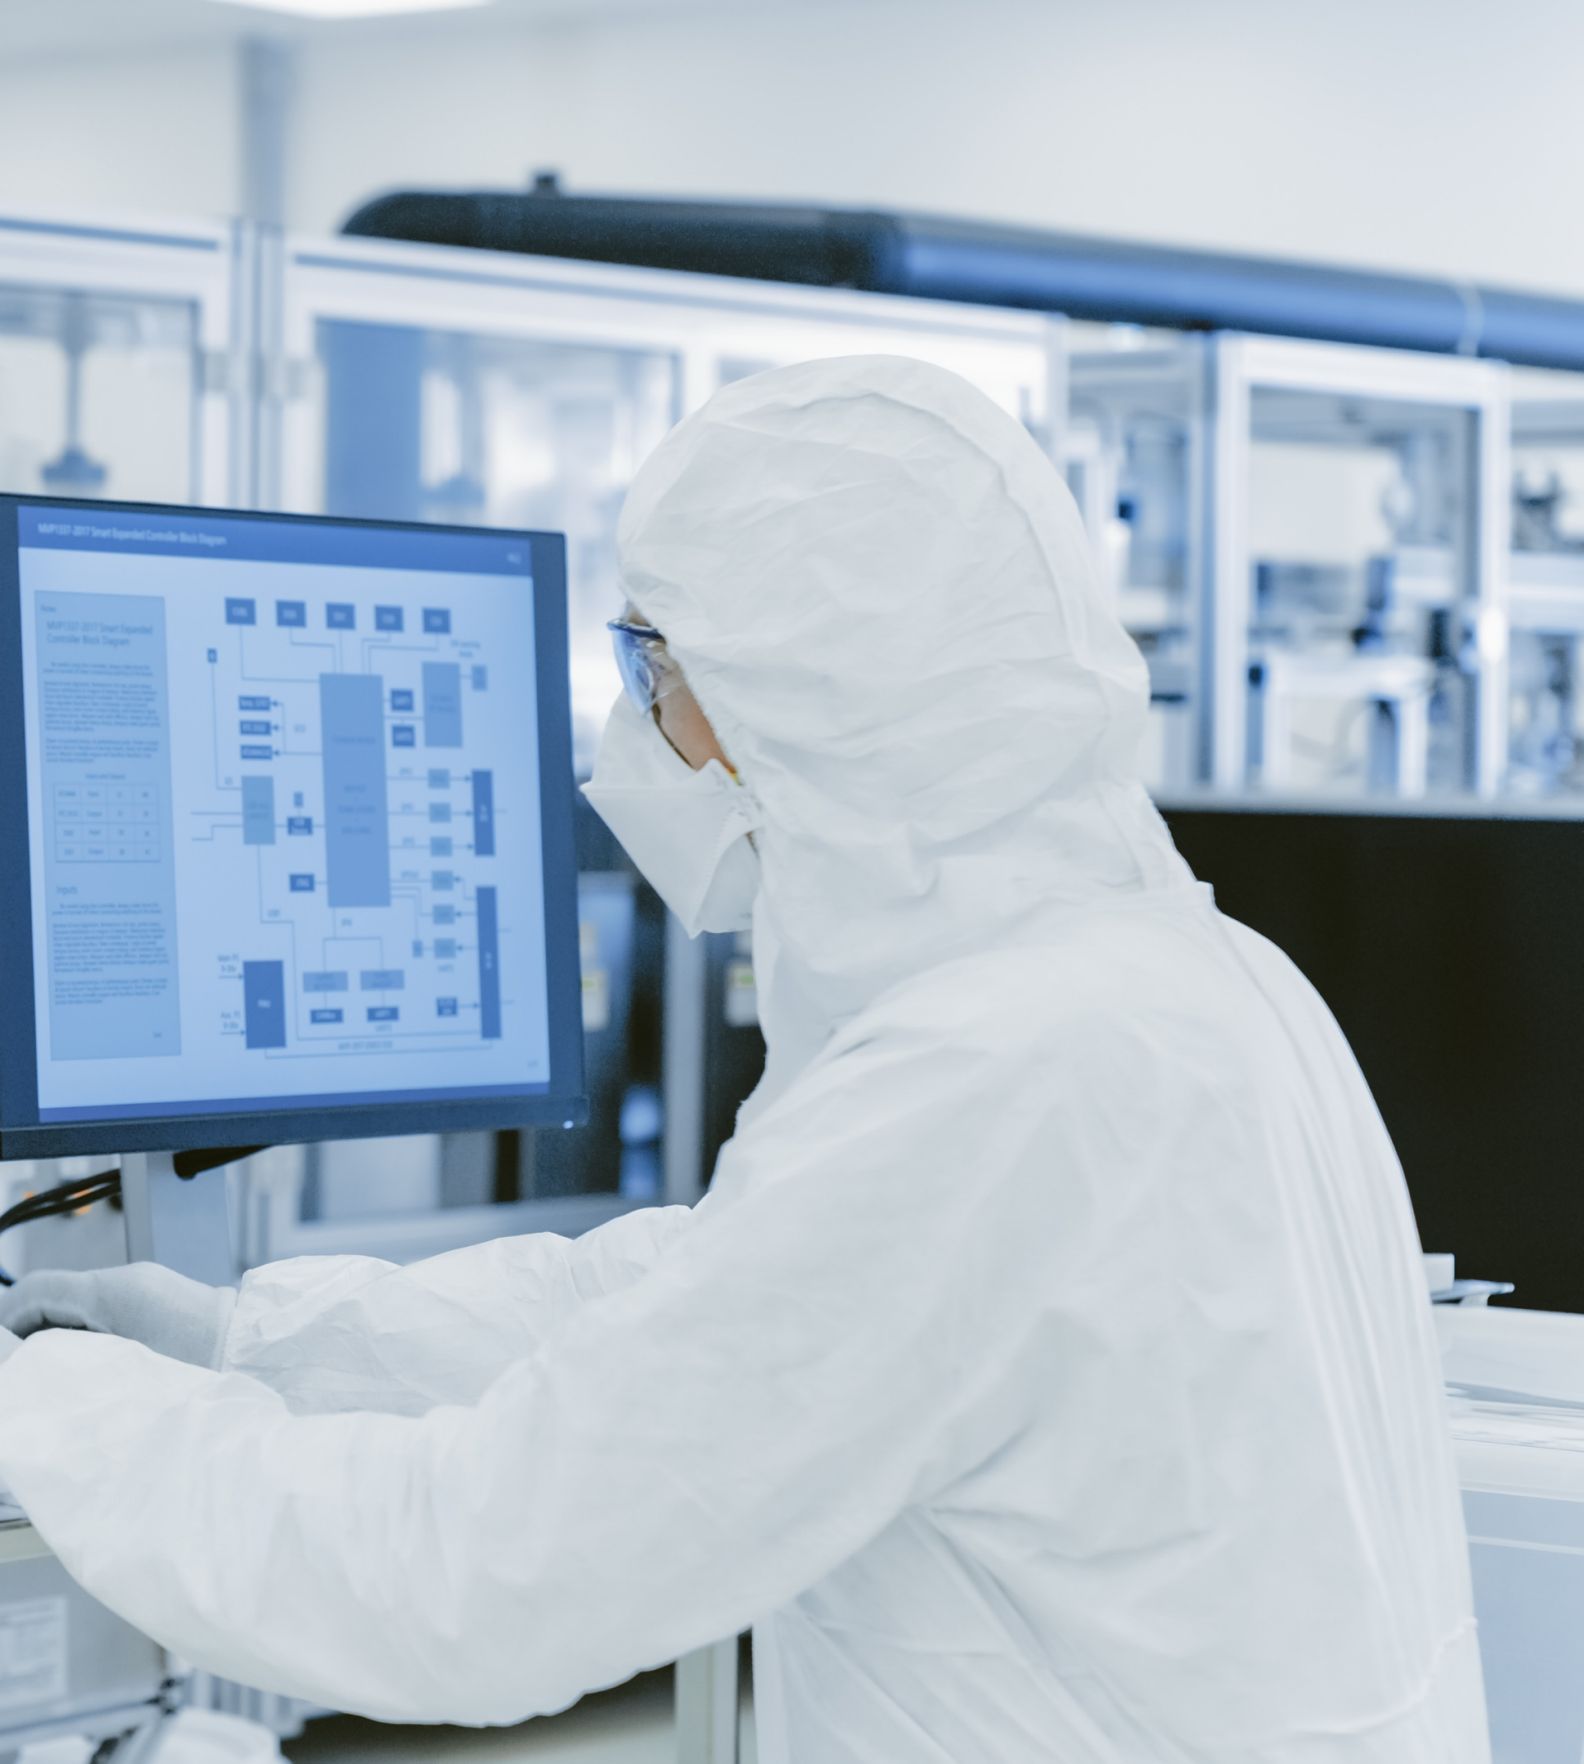 Man working at computer in a clean room setting